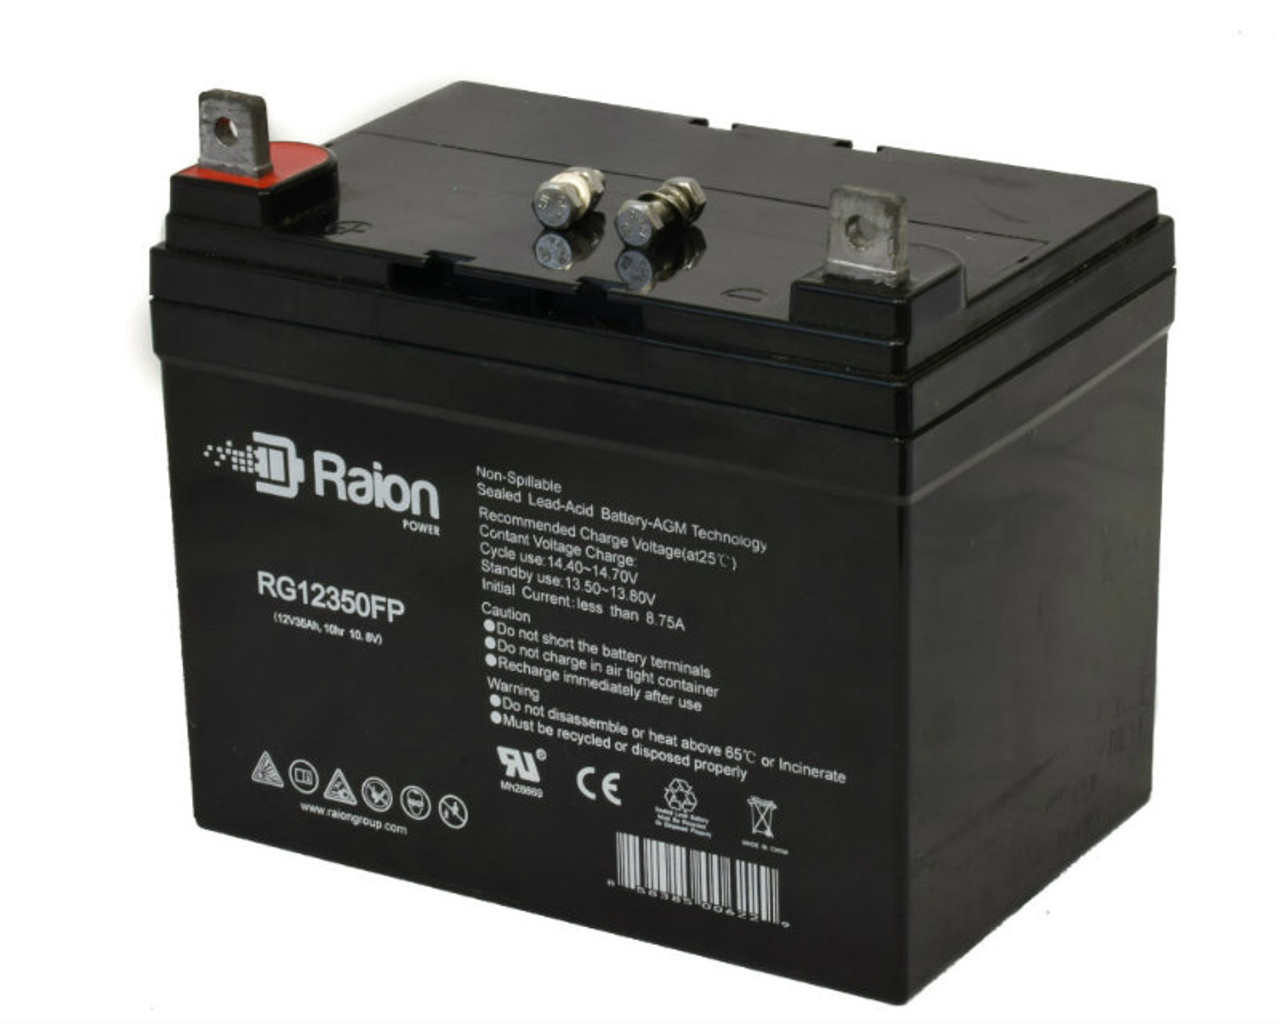 Raion Power Replacement 12V 35Ah Battery for Ariens Gravely EZR 1648 - 1 Pack